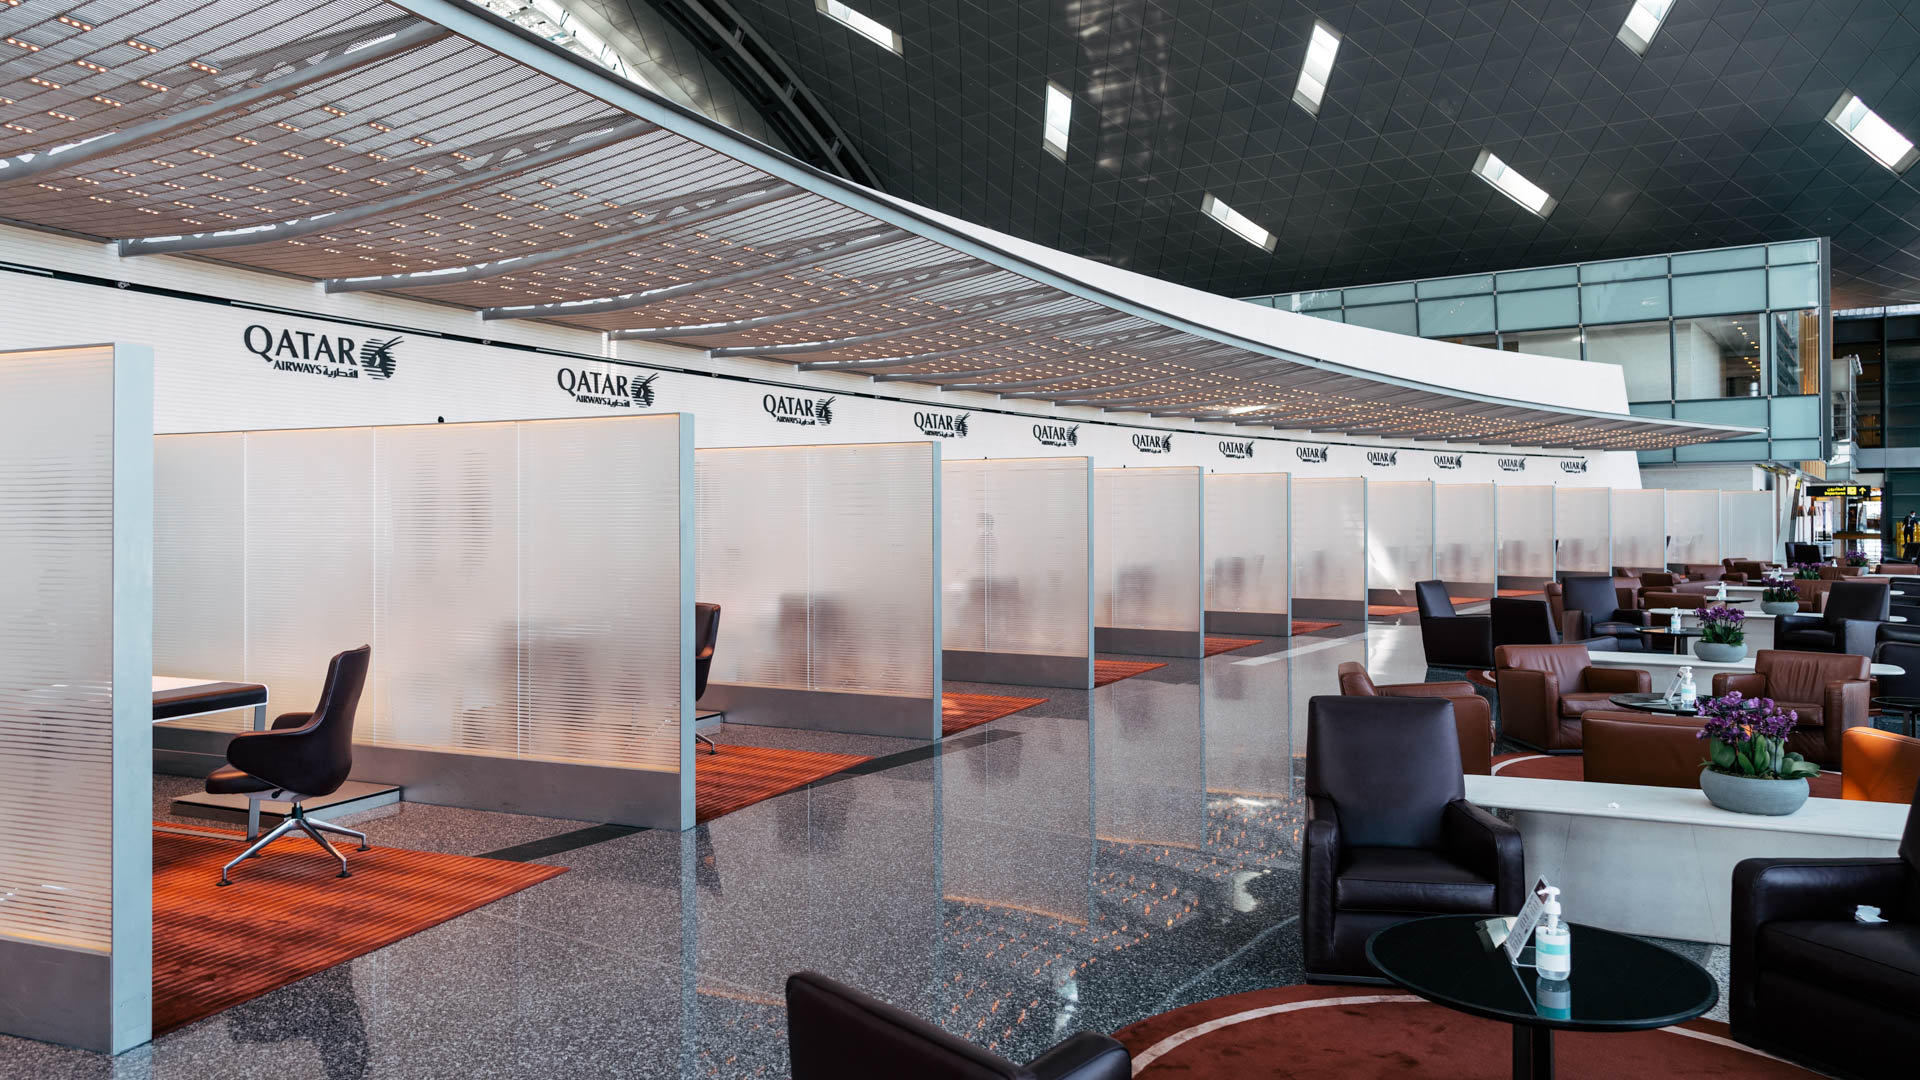 Qatar Airways First Class check-in booth